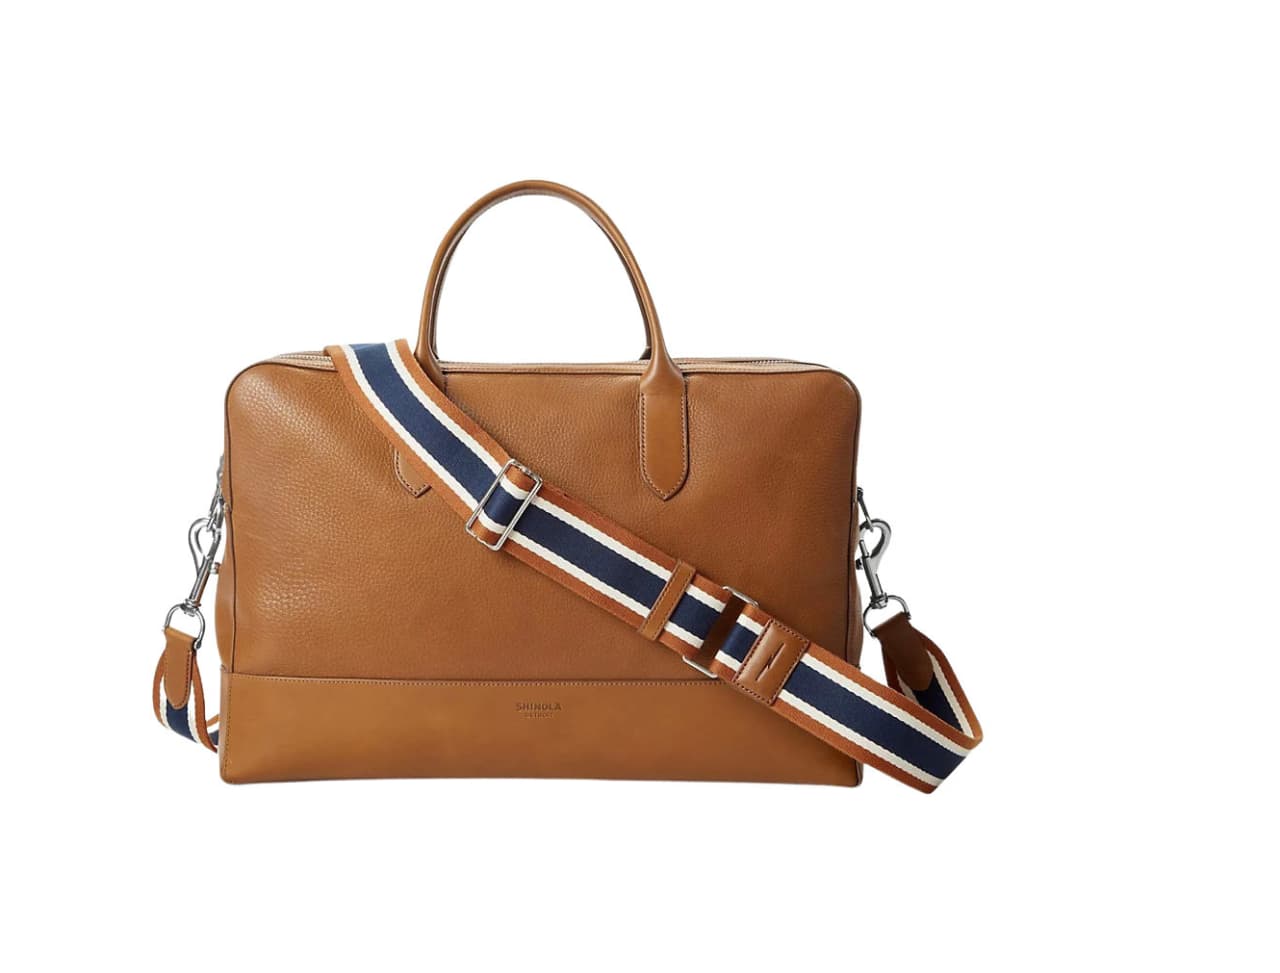 The Best Crossbody Bags for Travel and Commuting - Buy Side from WSJ